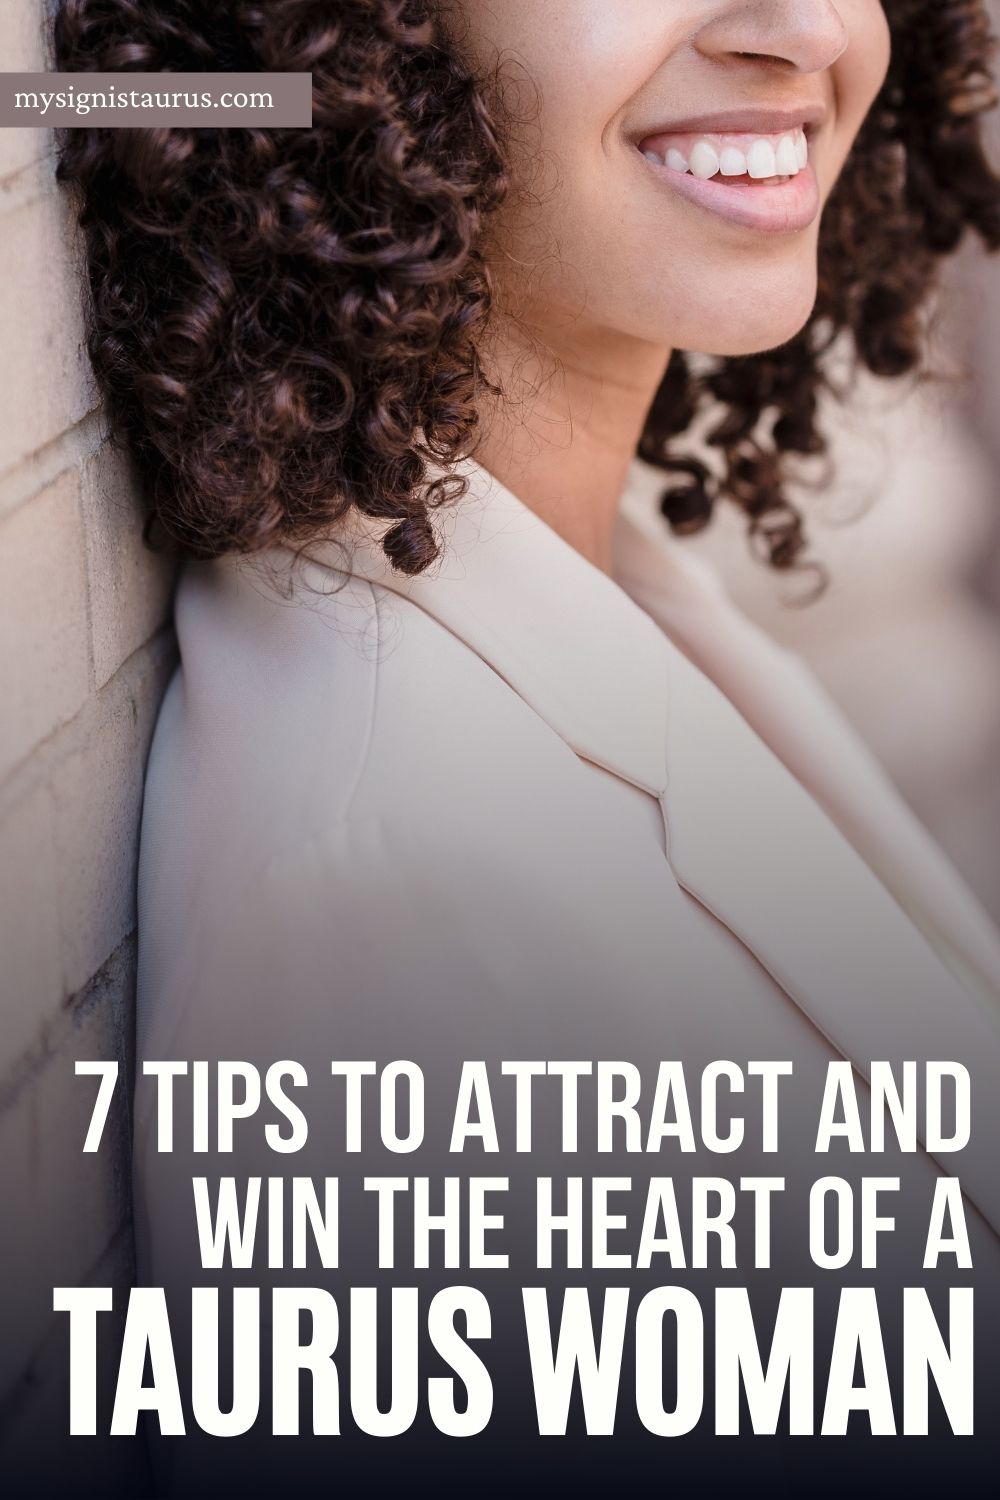 How To Attract A Taurus Woman (Tips To Win The Heart Of A Taurus Girl), Taurus woman seduction